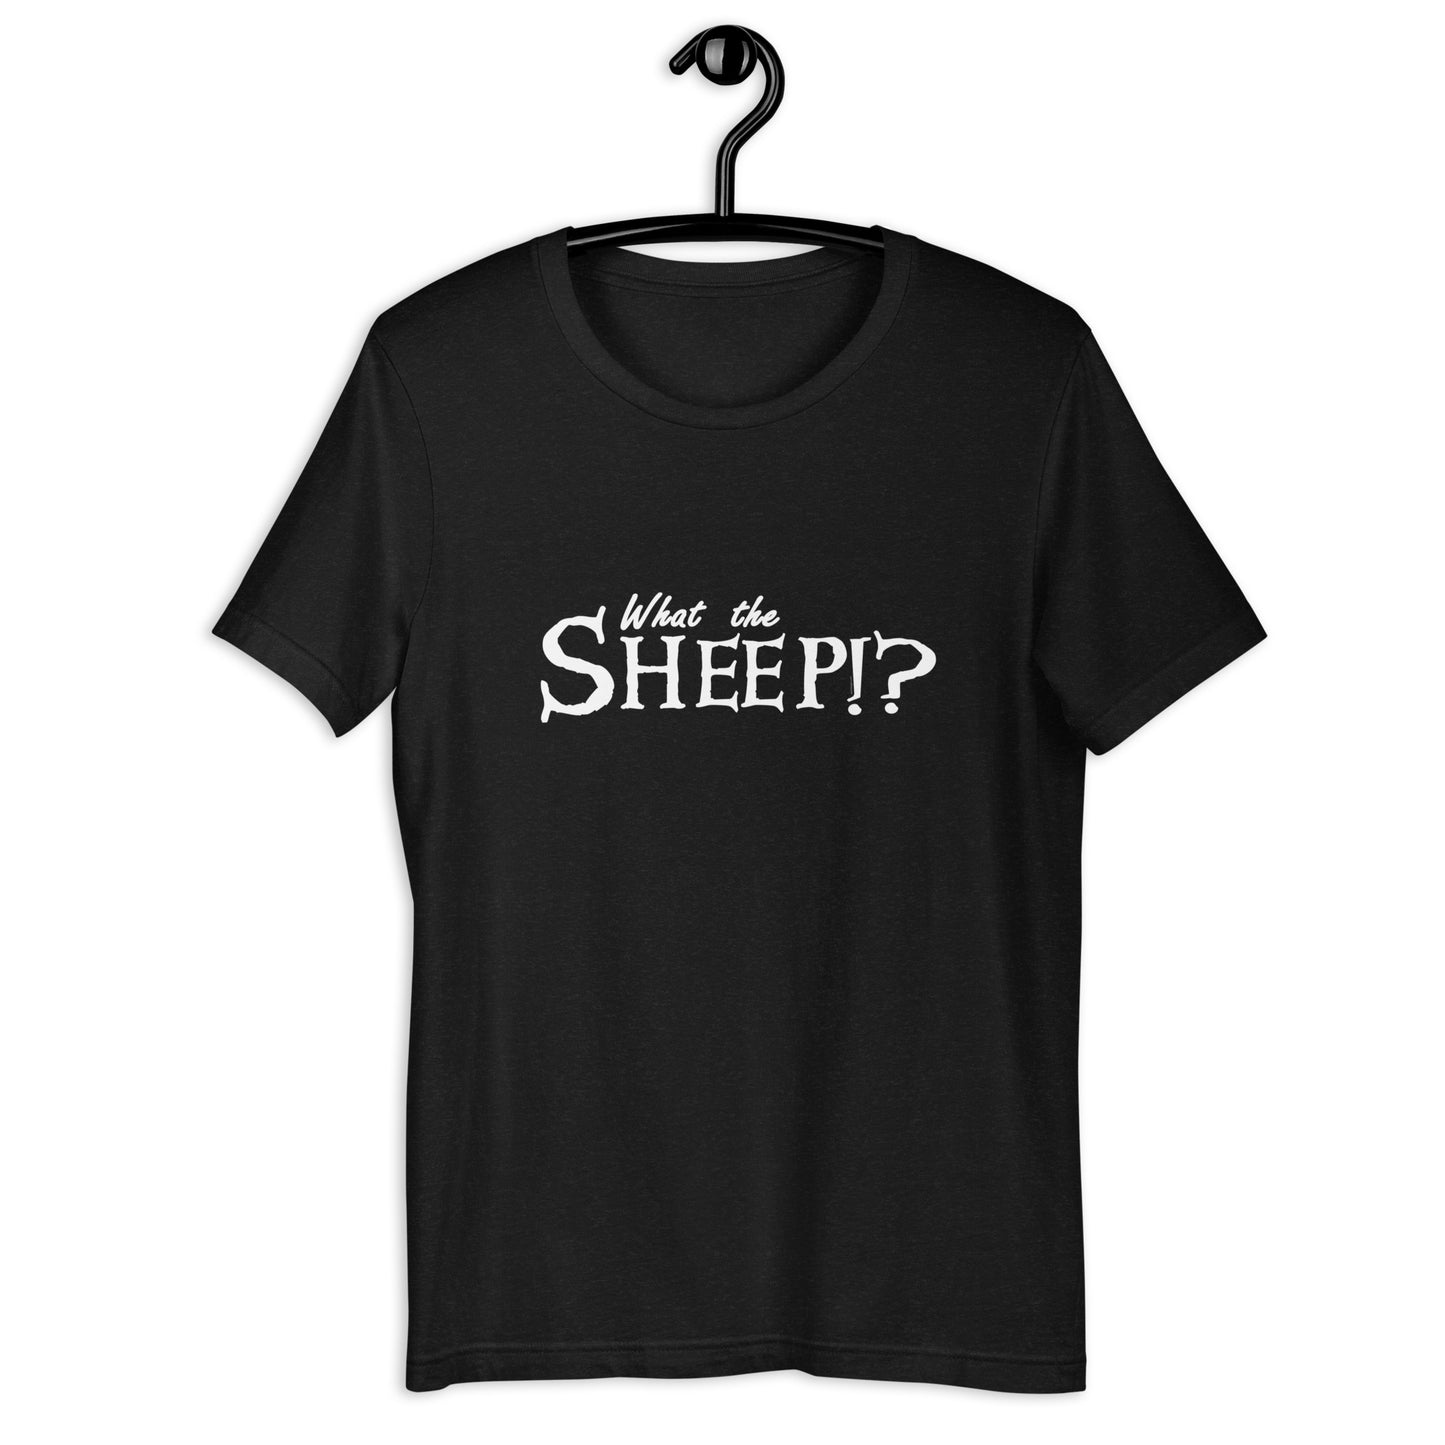 WHAT THE SHEEP? - Unisex t-shirt